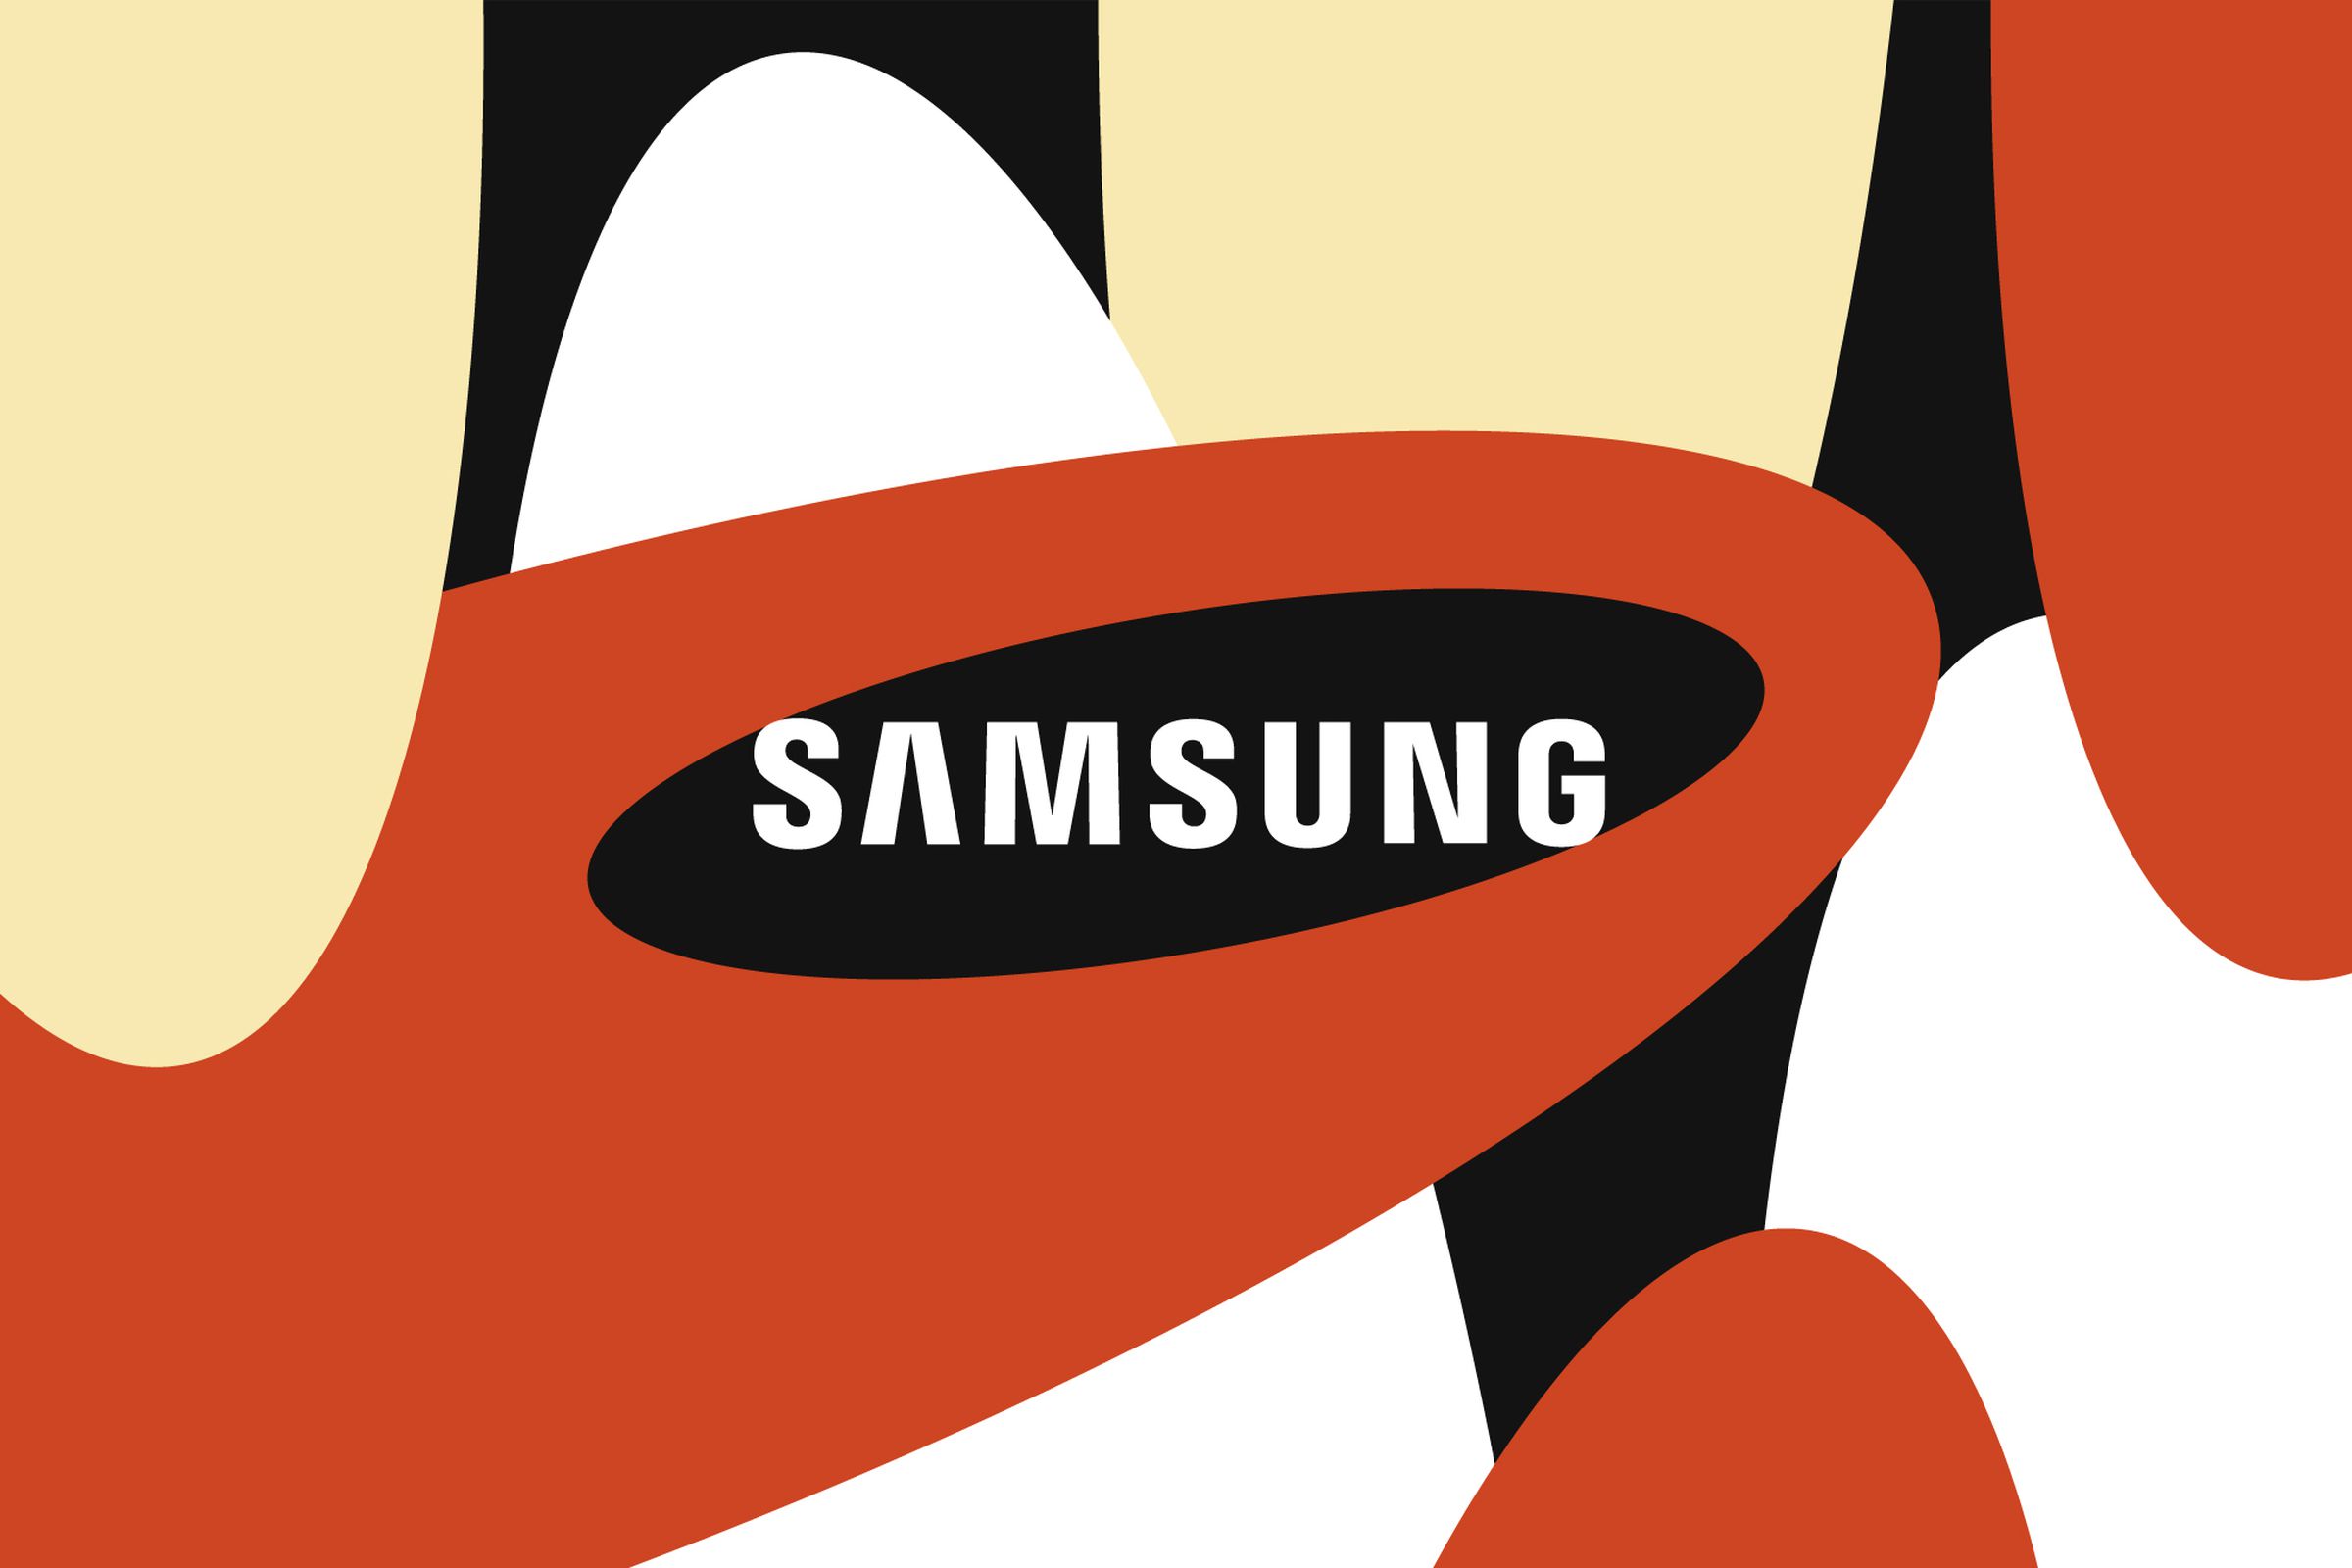 Samsung logo on red, white, black, and yello background